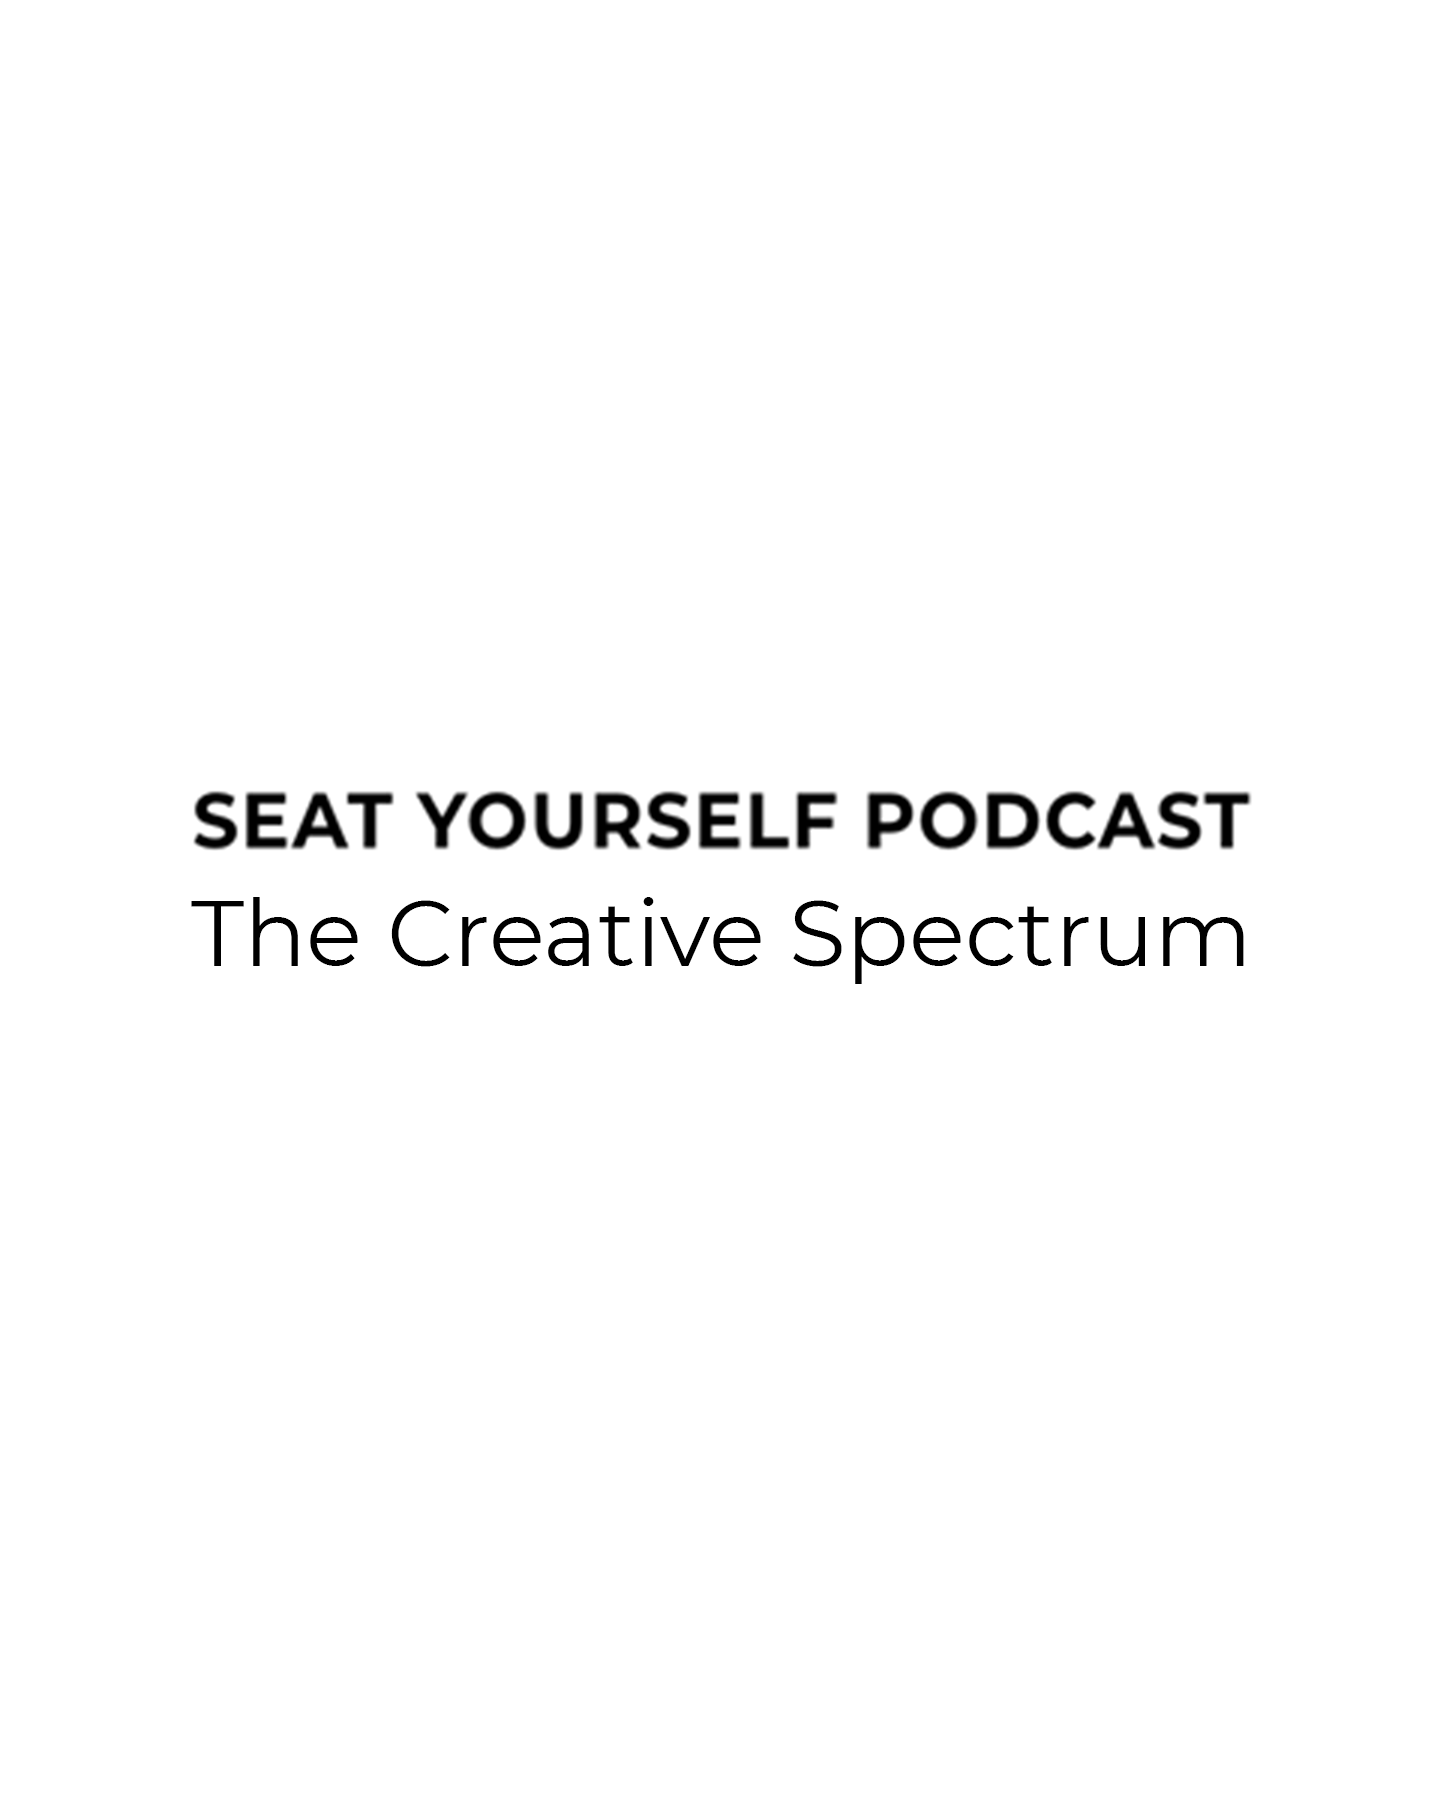 Seat yourself podcast